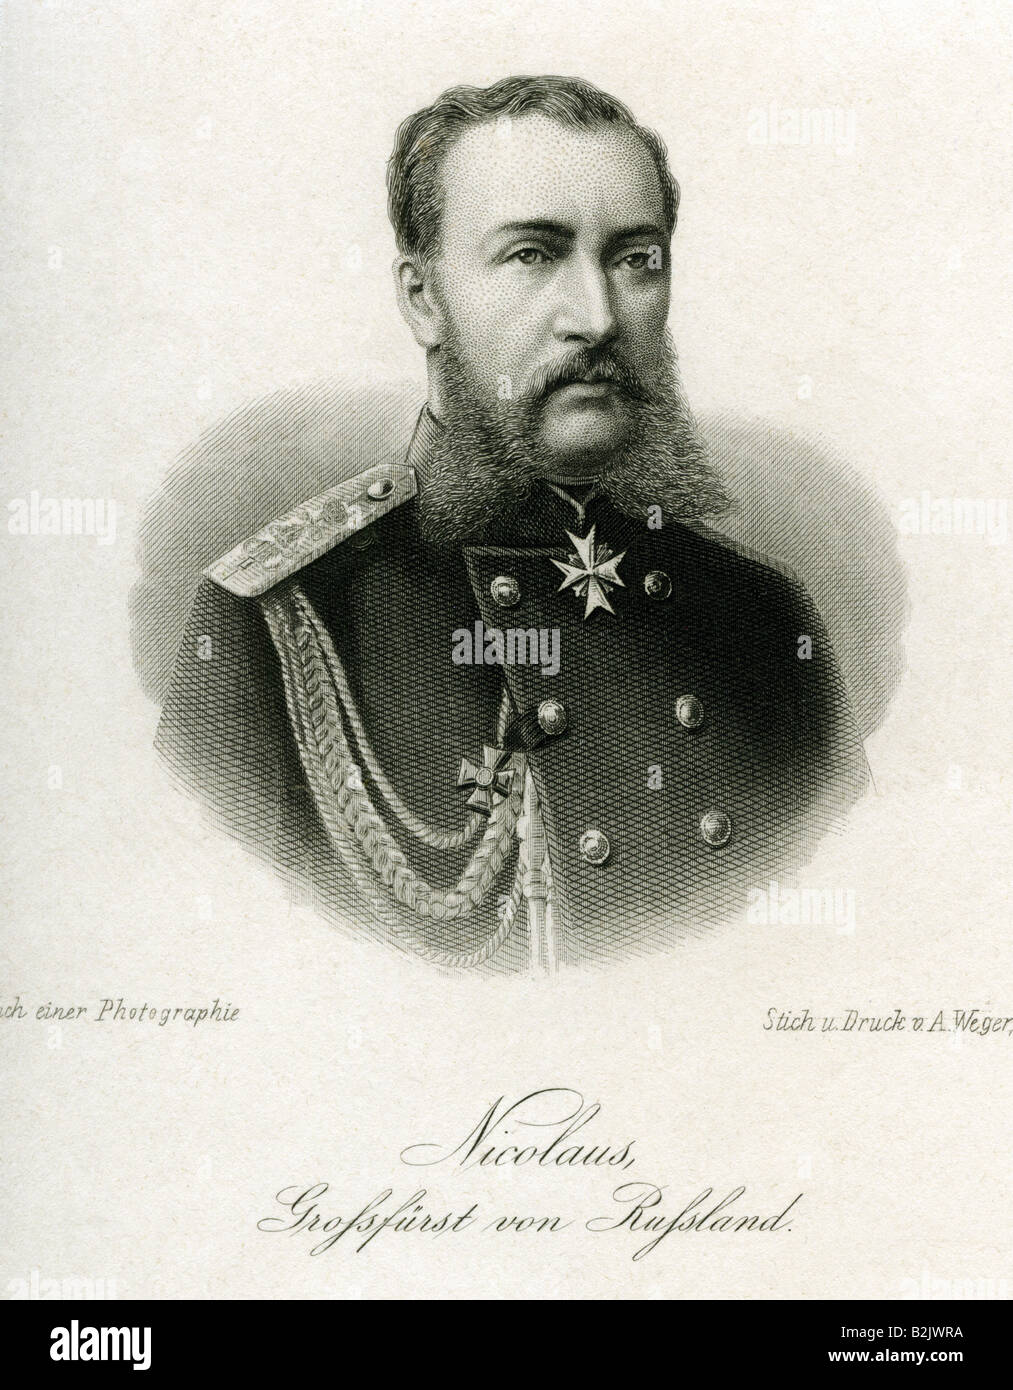 Nicholas Nikolaevich, 8.8.1831 - 25.4.1891, Grand Duke of Russia, Russian field marshal, portrait, steel engraving, based on a photograph, by A. Wegner, Leipzig, Germany, 19th century, Artist's Copyright has not to be cleared Stock Photo